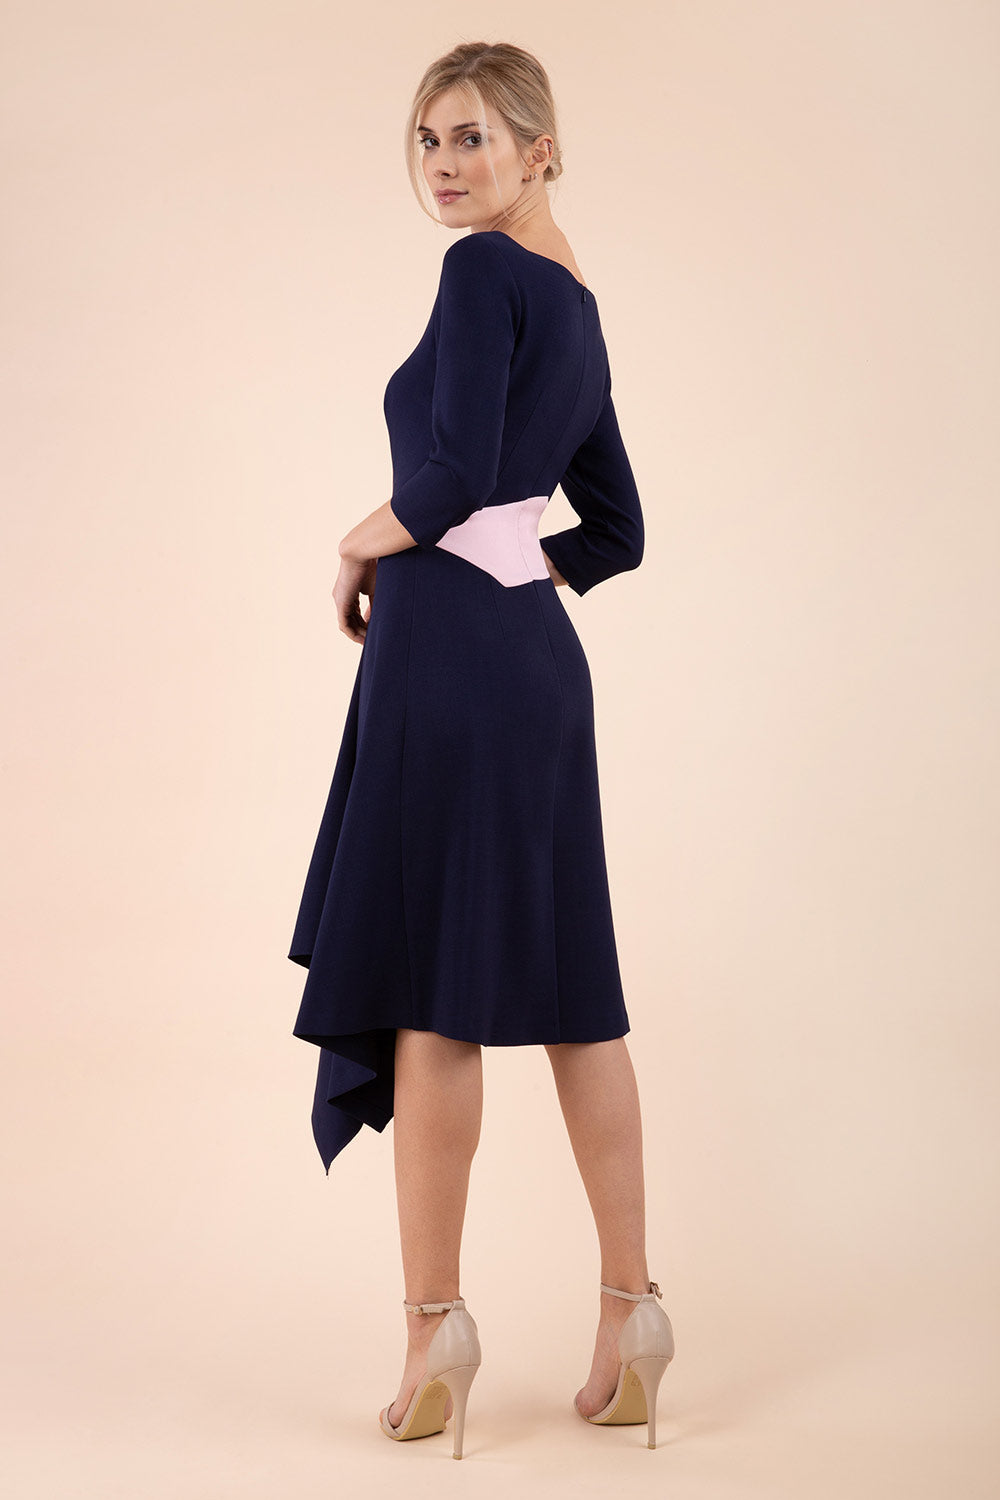 Blonde Model wearing Diva Catwalk Pinto Contrast Swing Dress with asymmetric skirt and asymmetric neckline with three quarter sleeve in Navy Blue back